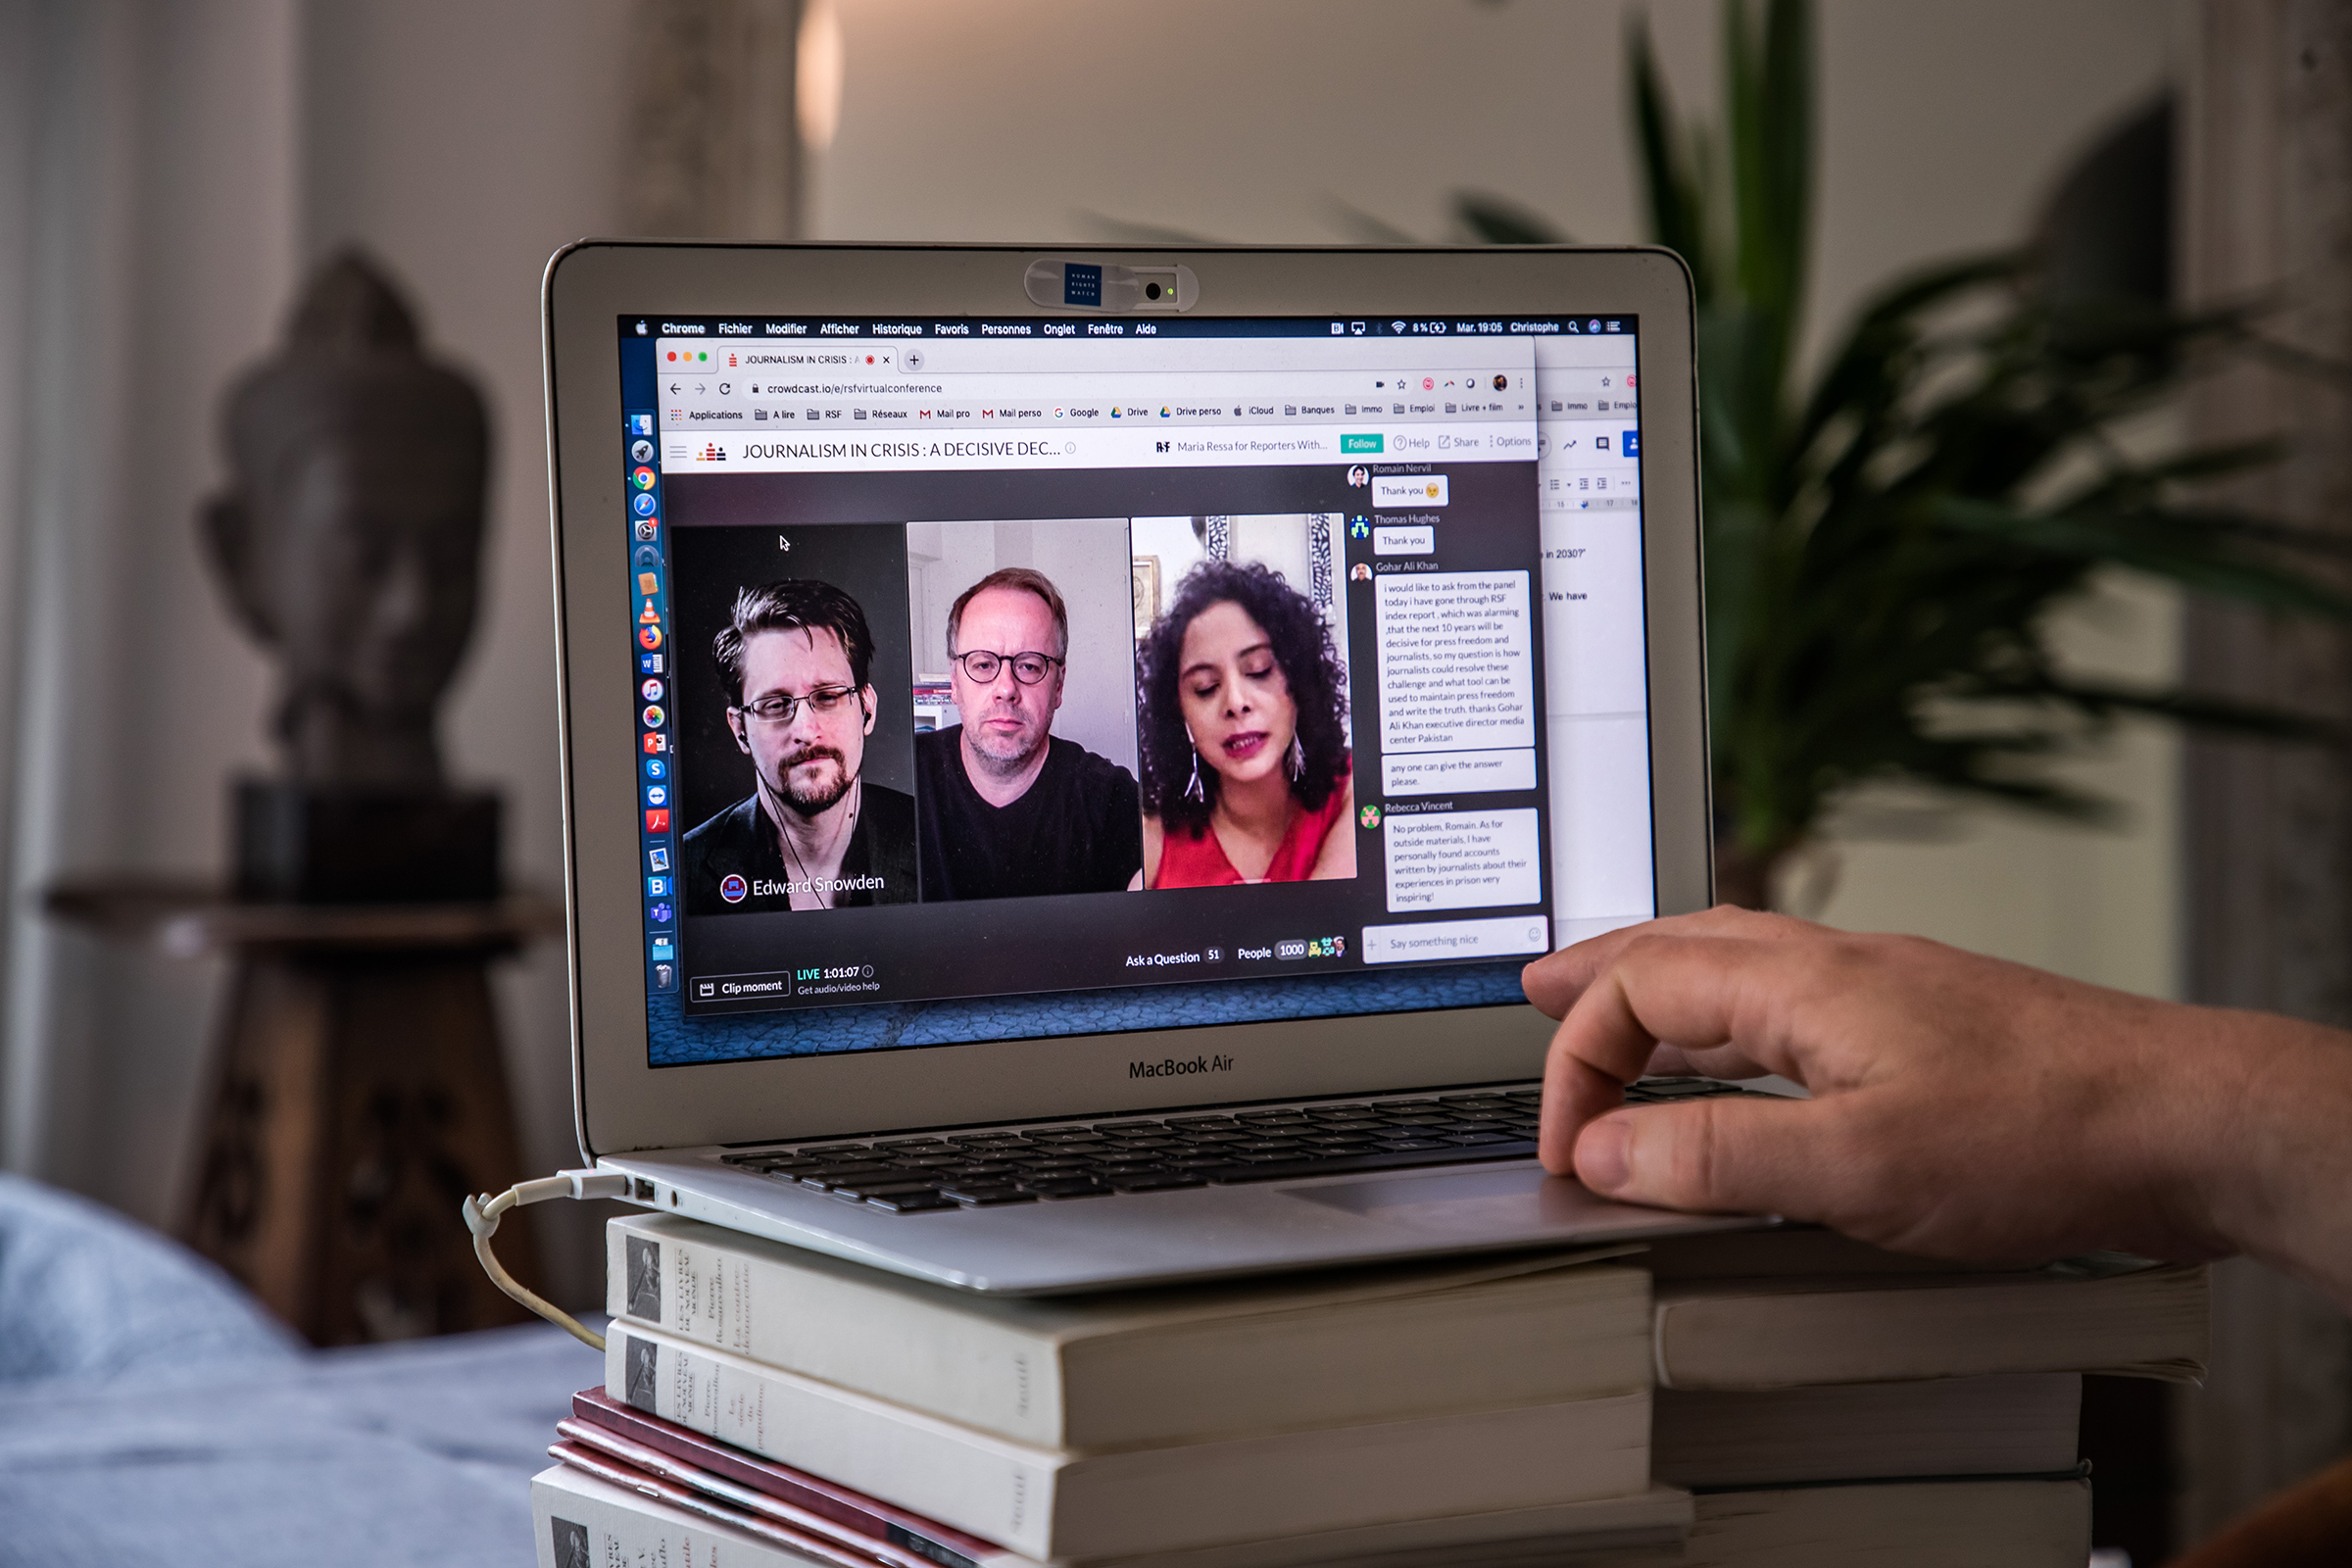 Christophe Deloire (R), Secretary General of Reporter Without Borders, attends a video conference call with Edward Snowden (L on the screen) and Rana Ayyub (R on the screen) during the launch of the 2020 Press Freedom Index in Paris in April 2020.